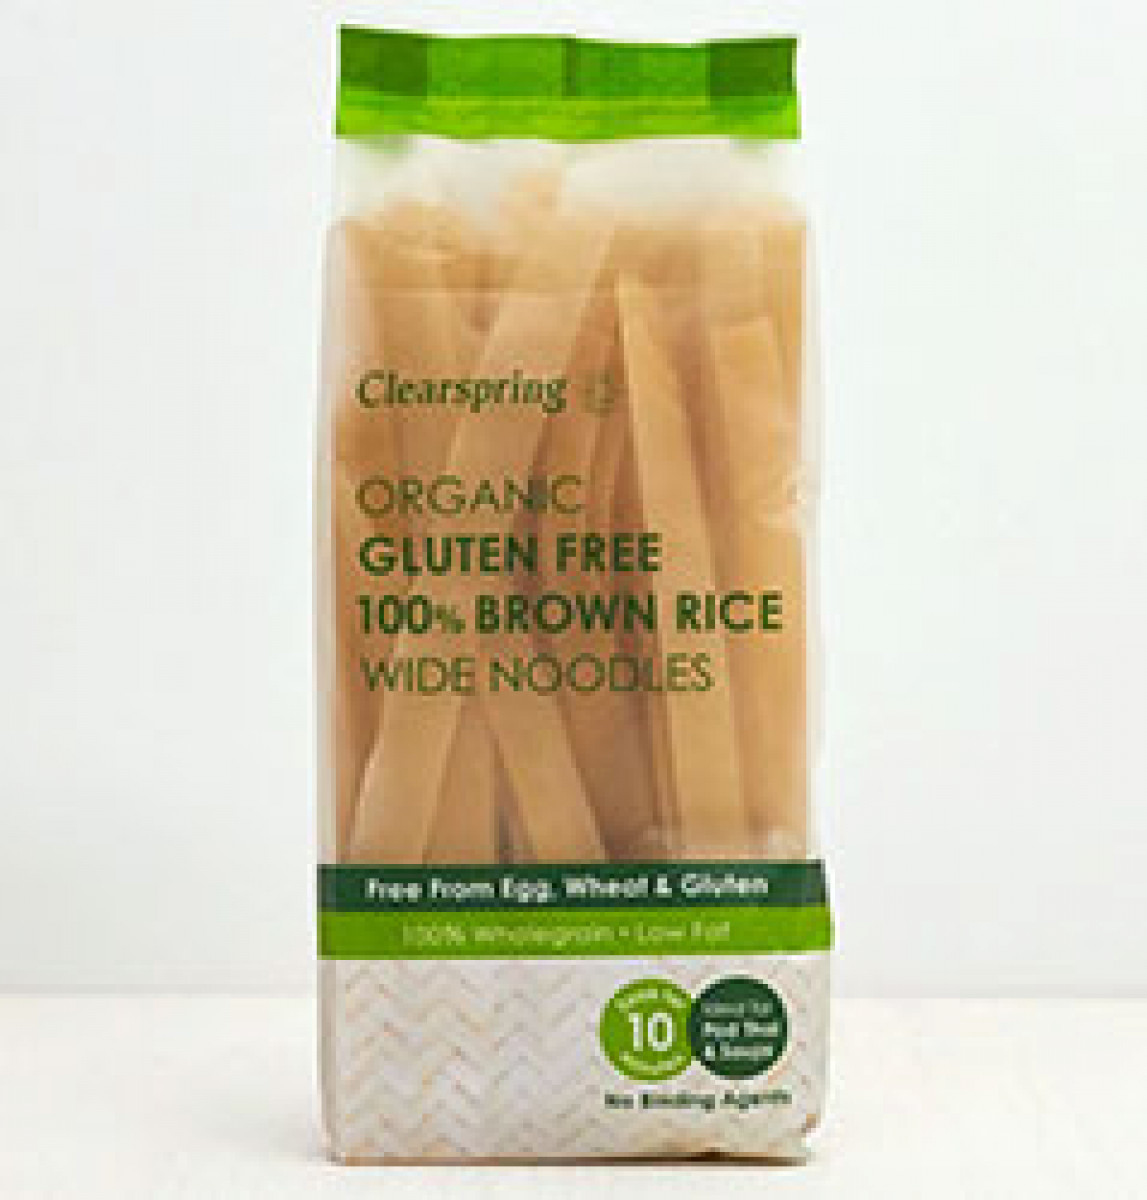 Product picture for Gluten Free Noodles Wide 100% Brown Rice